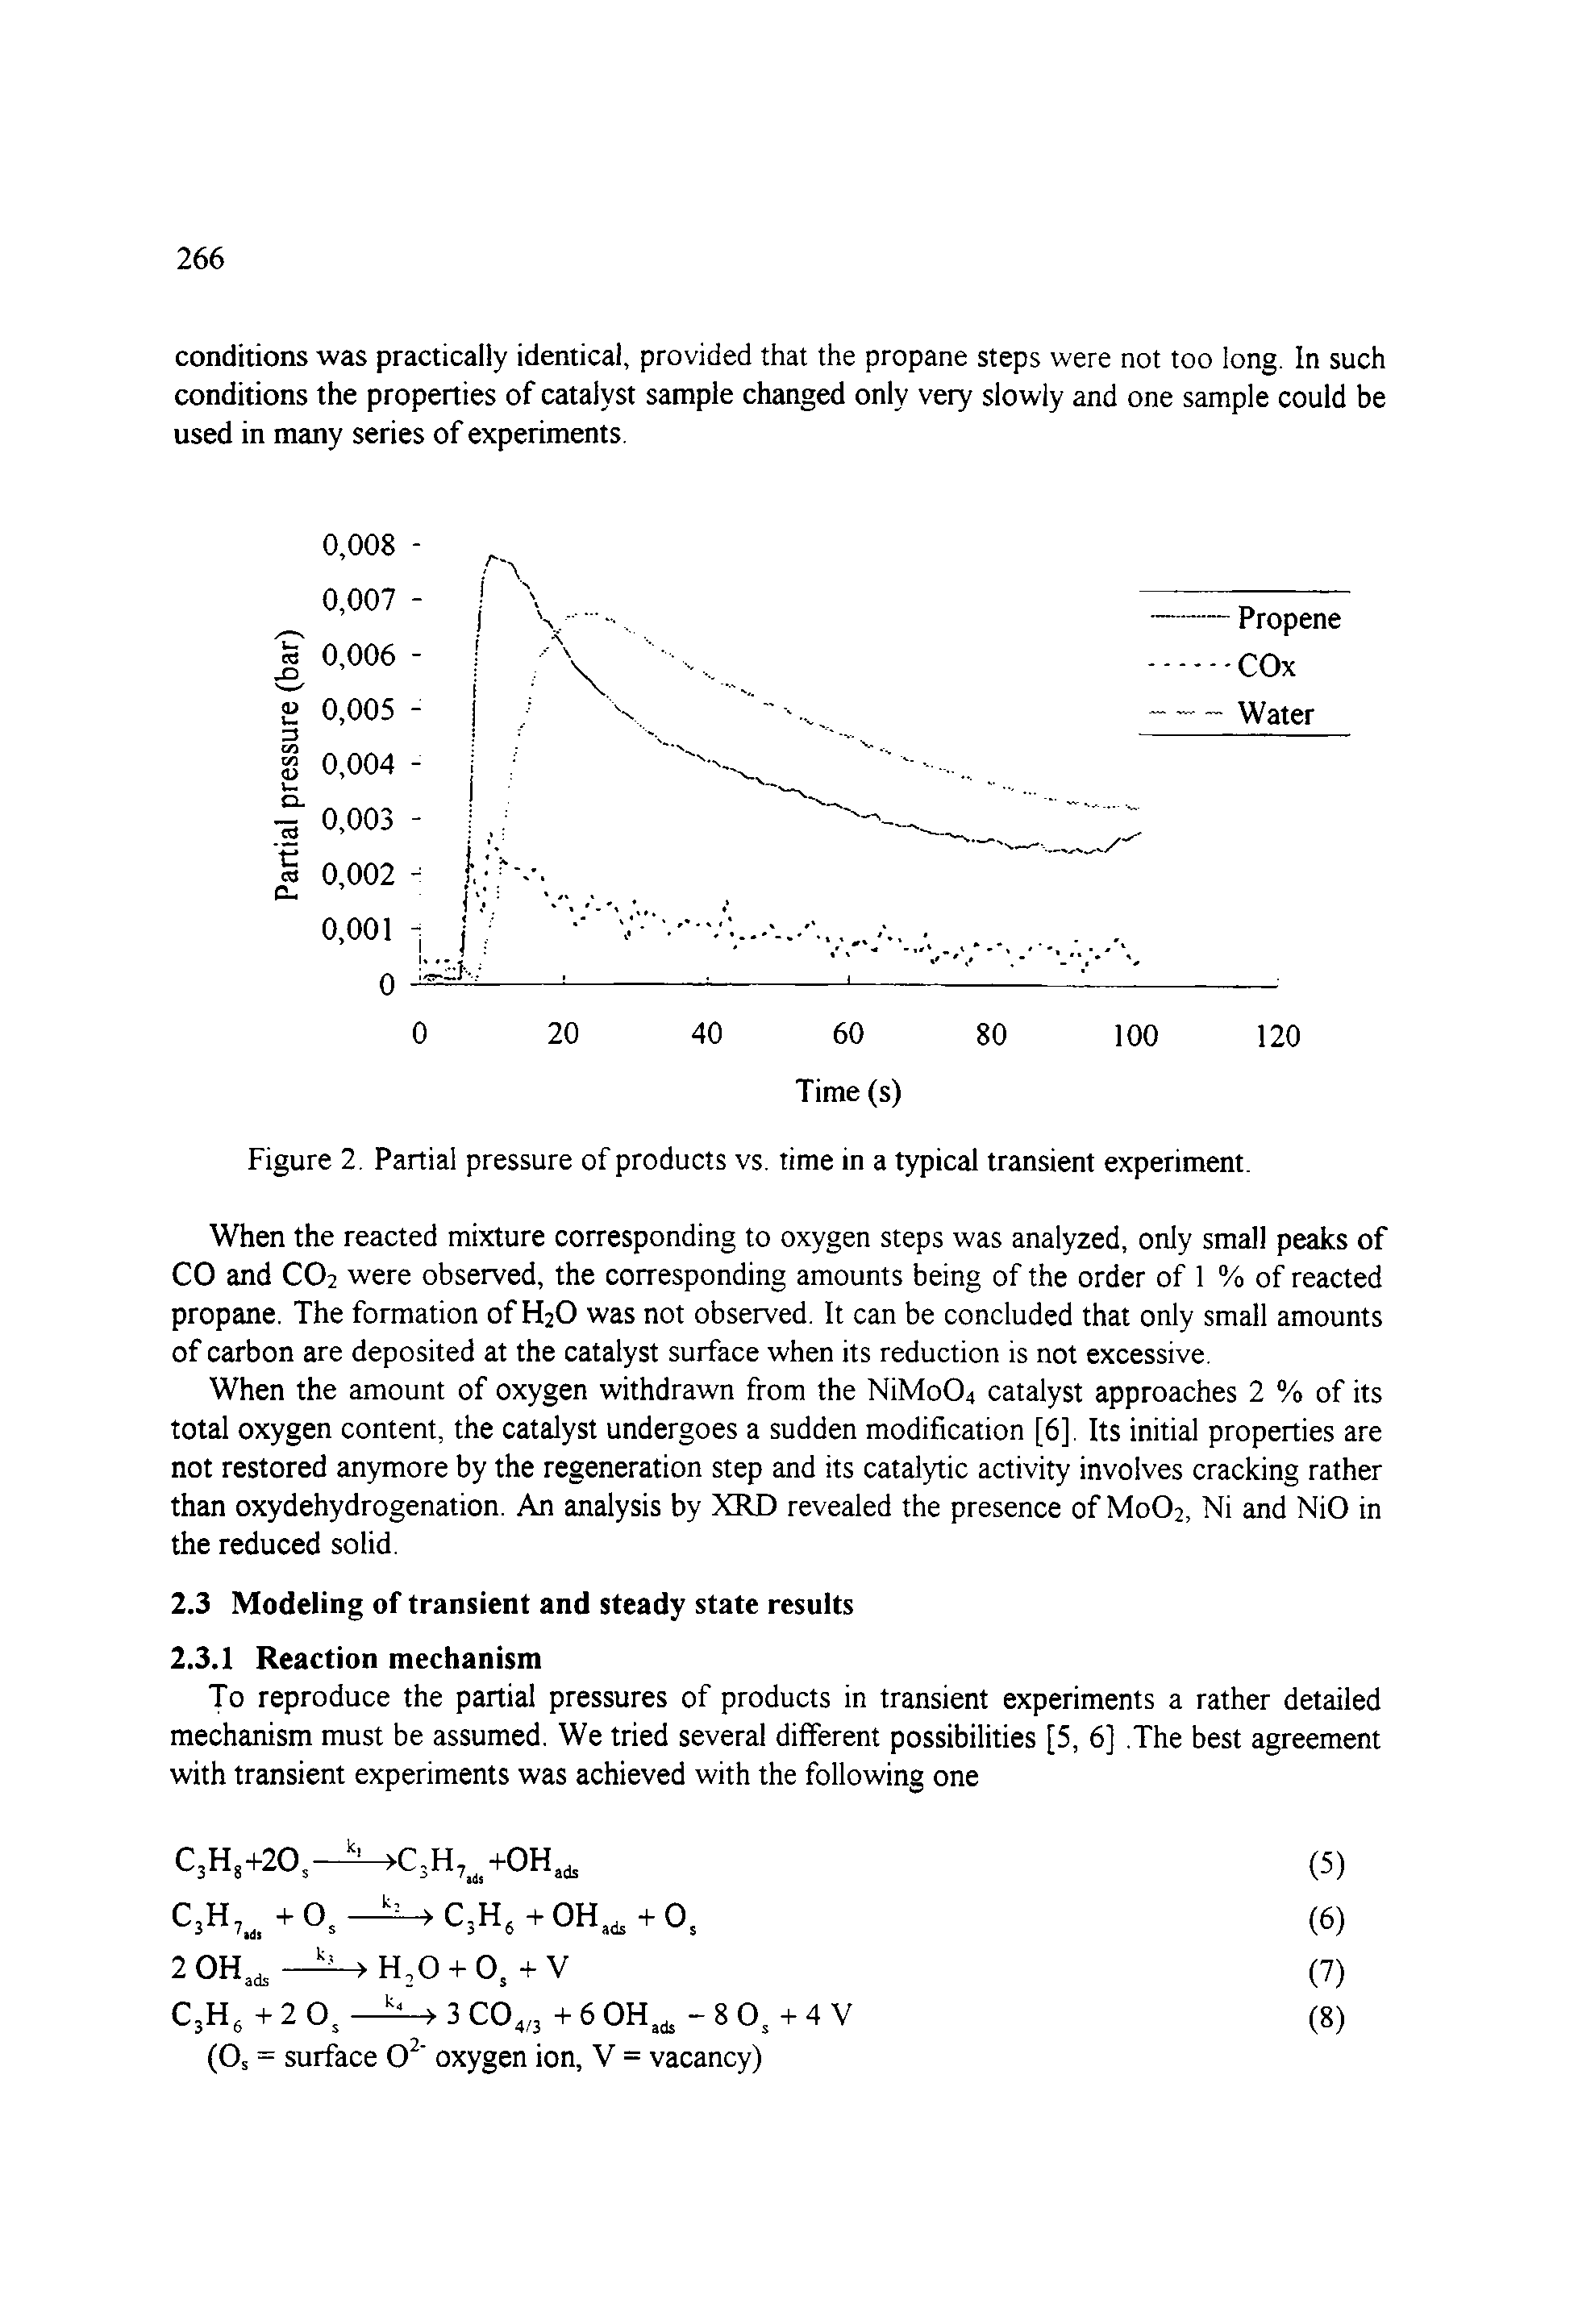 Figure 2. Partial pressure of products vs. time in a typical transient experiment...